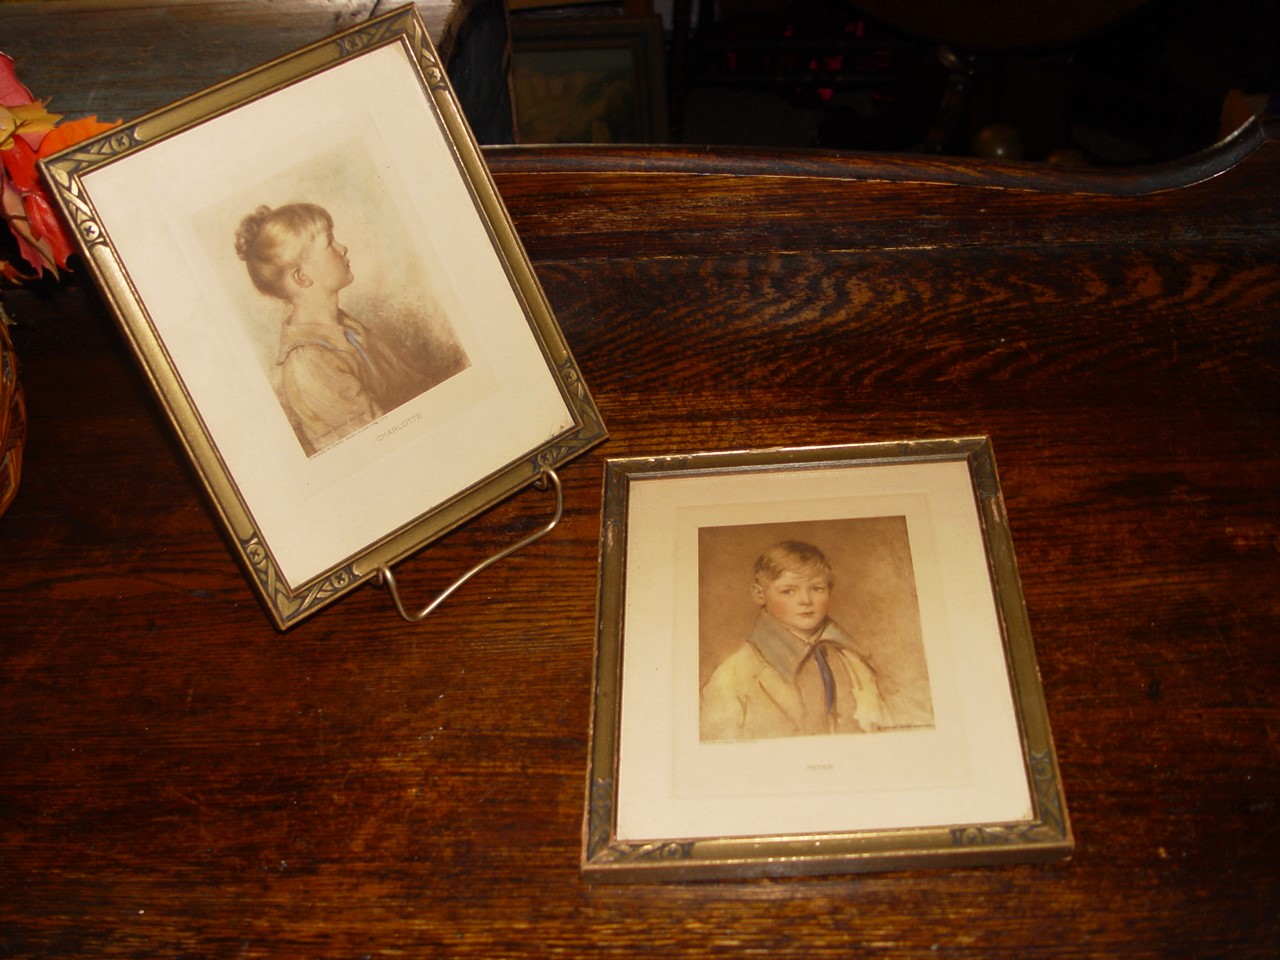 Peter And Charlotte,
                                        Portrait Prints, Edward Gross
                                        Co. NY